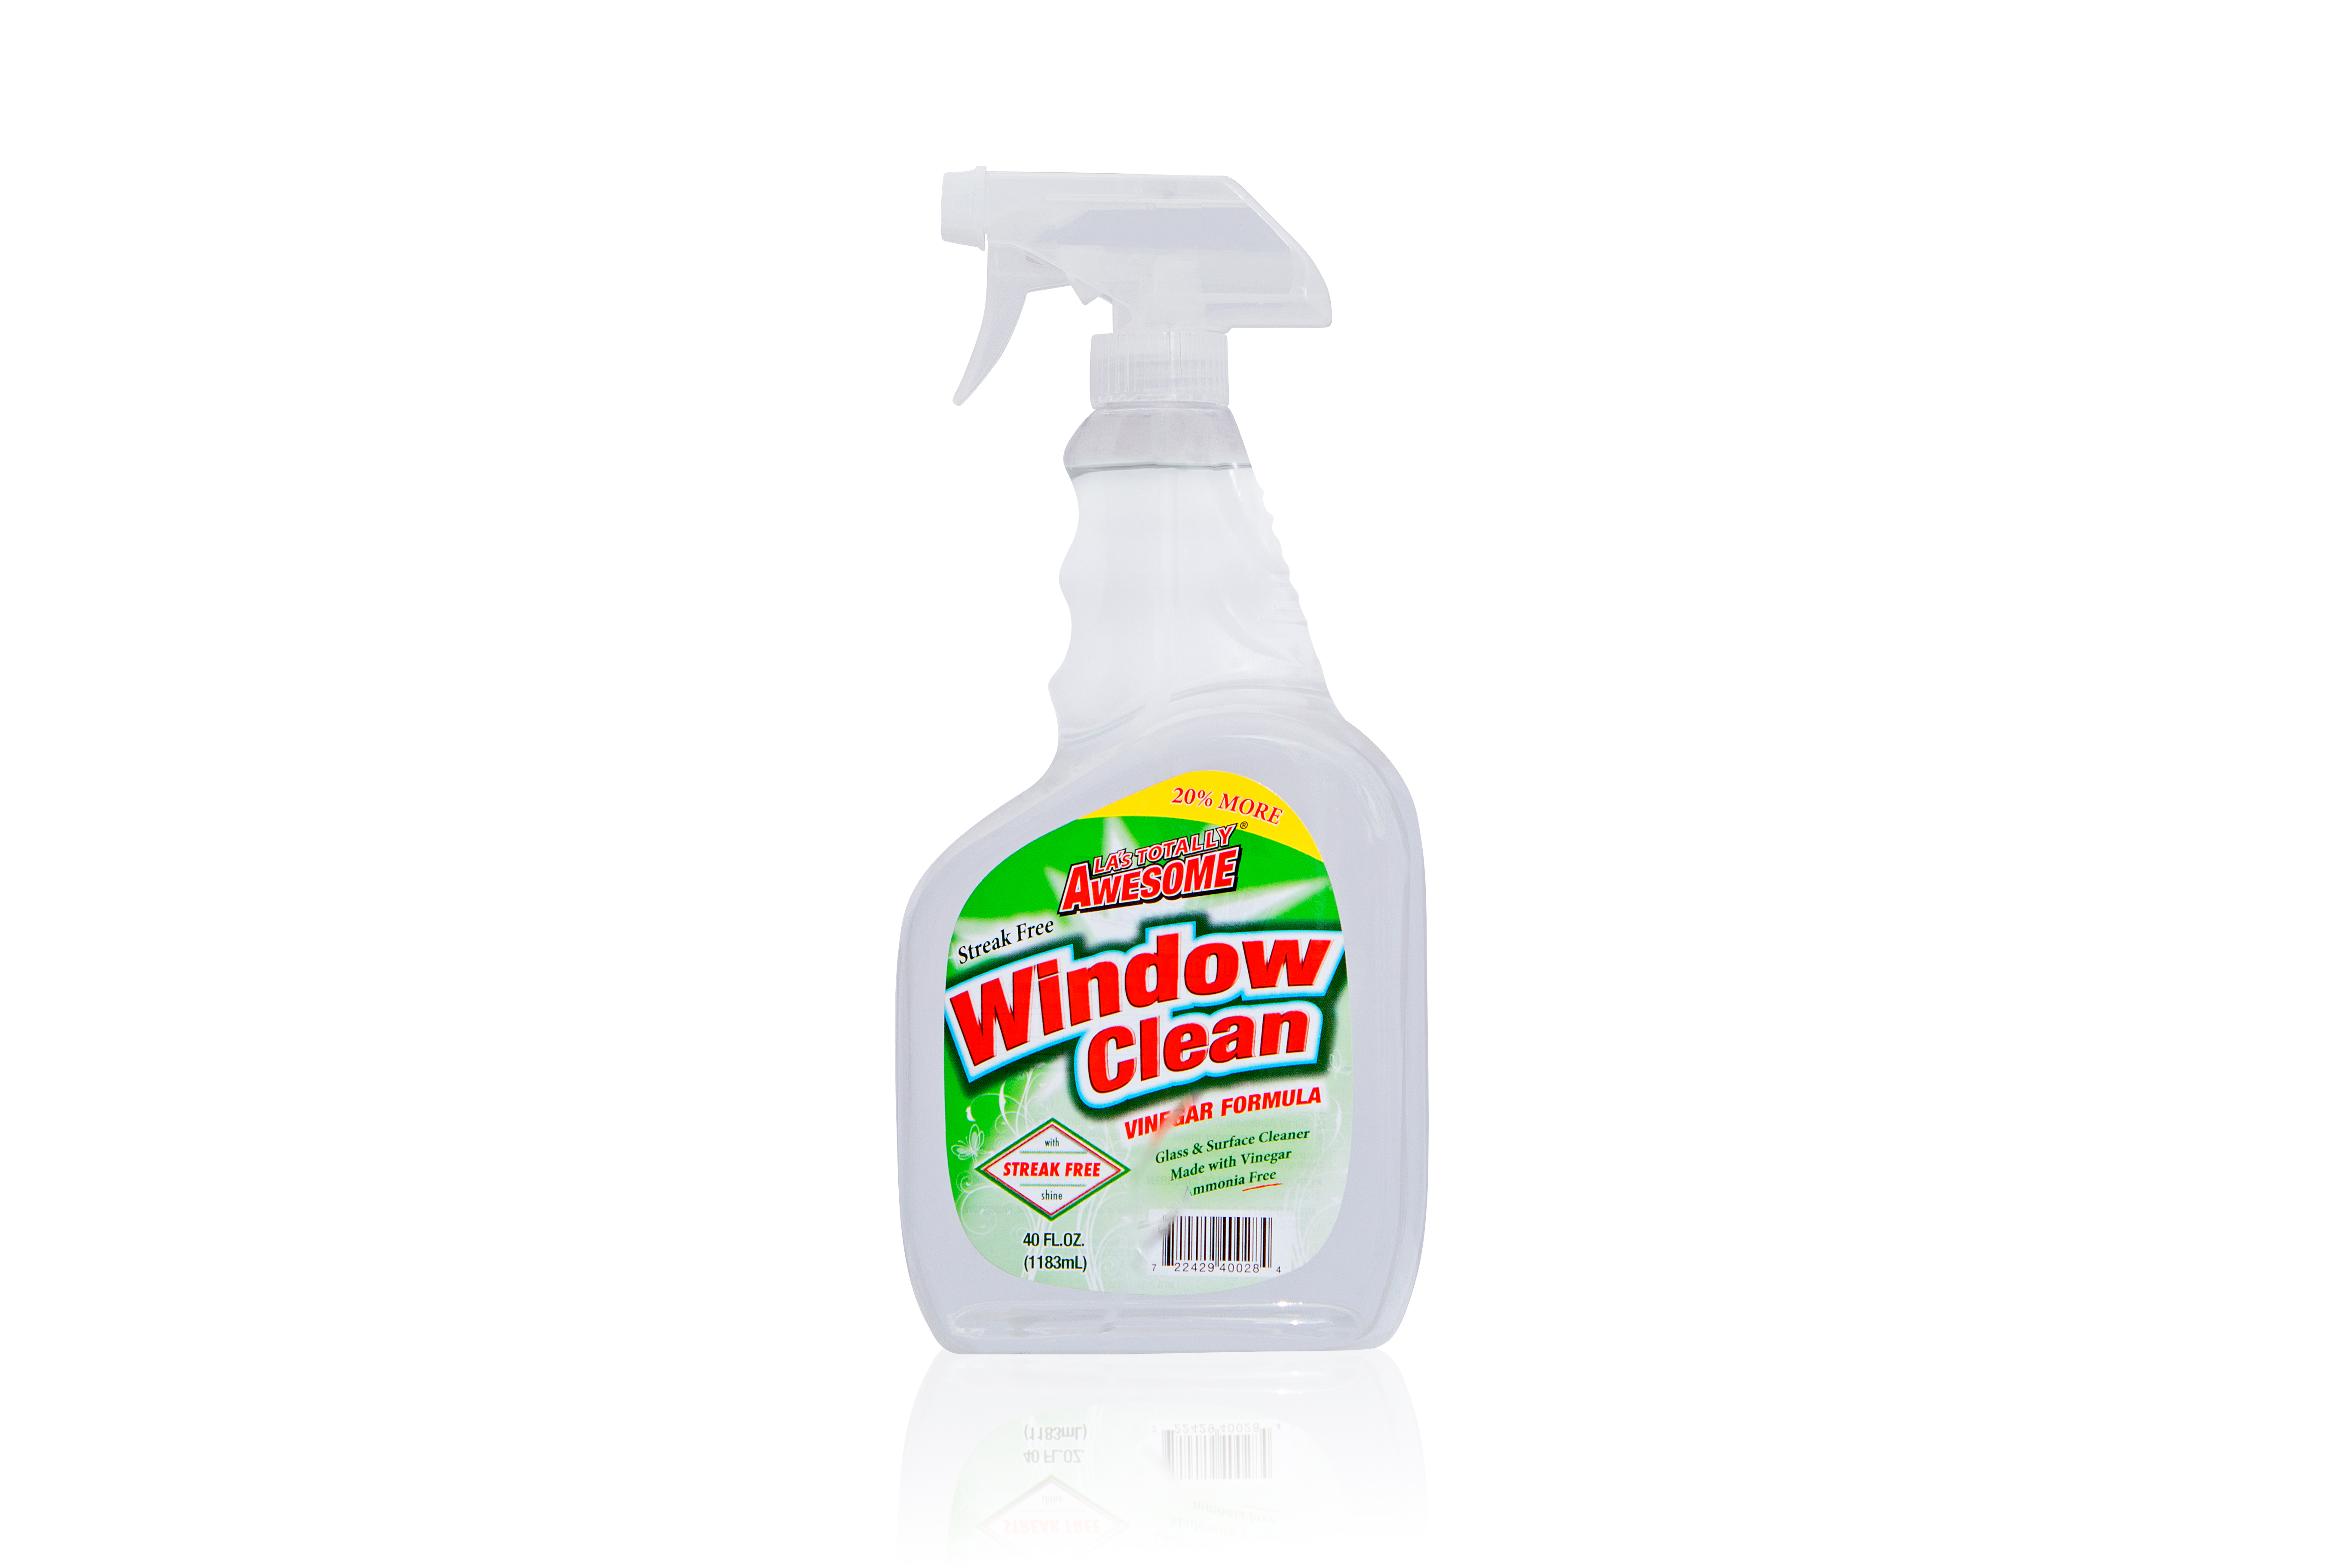 How to Clean Surfaces With Vinegar